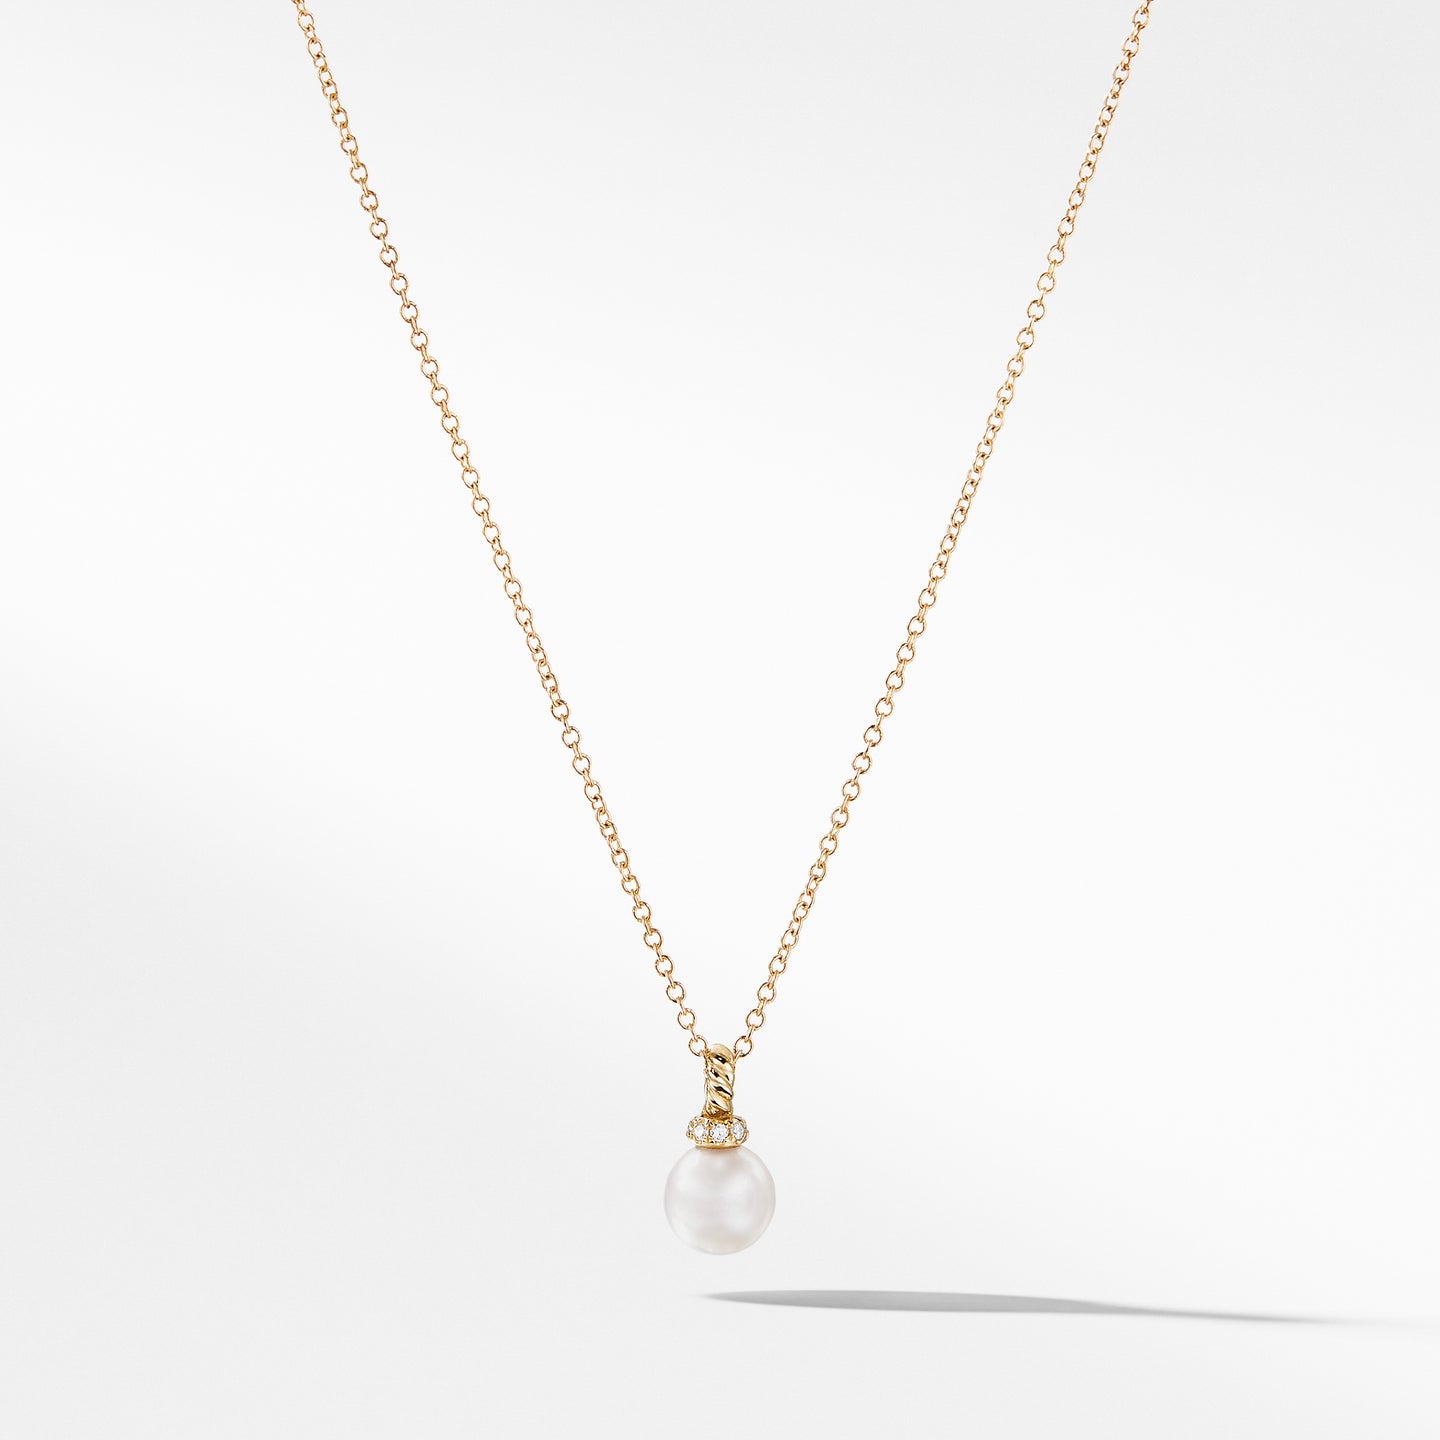 Solari Pendant Necklace with Diamonds and Pearl in 18K Yellow Gold